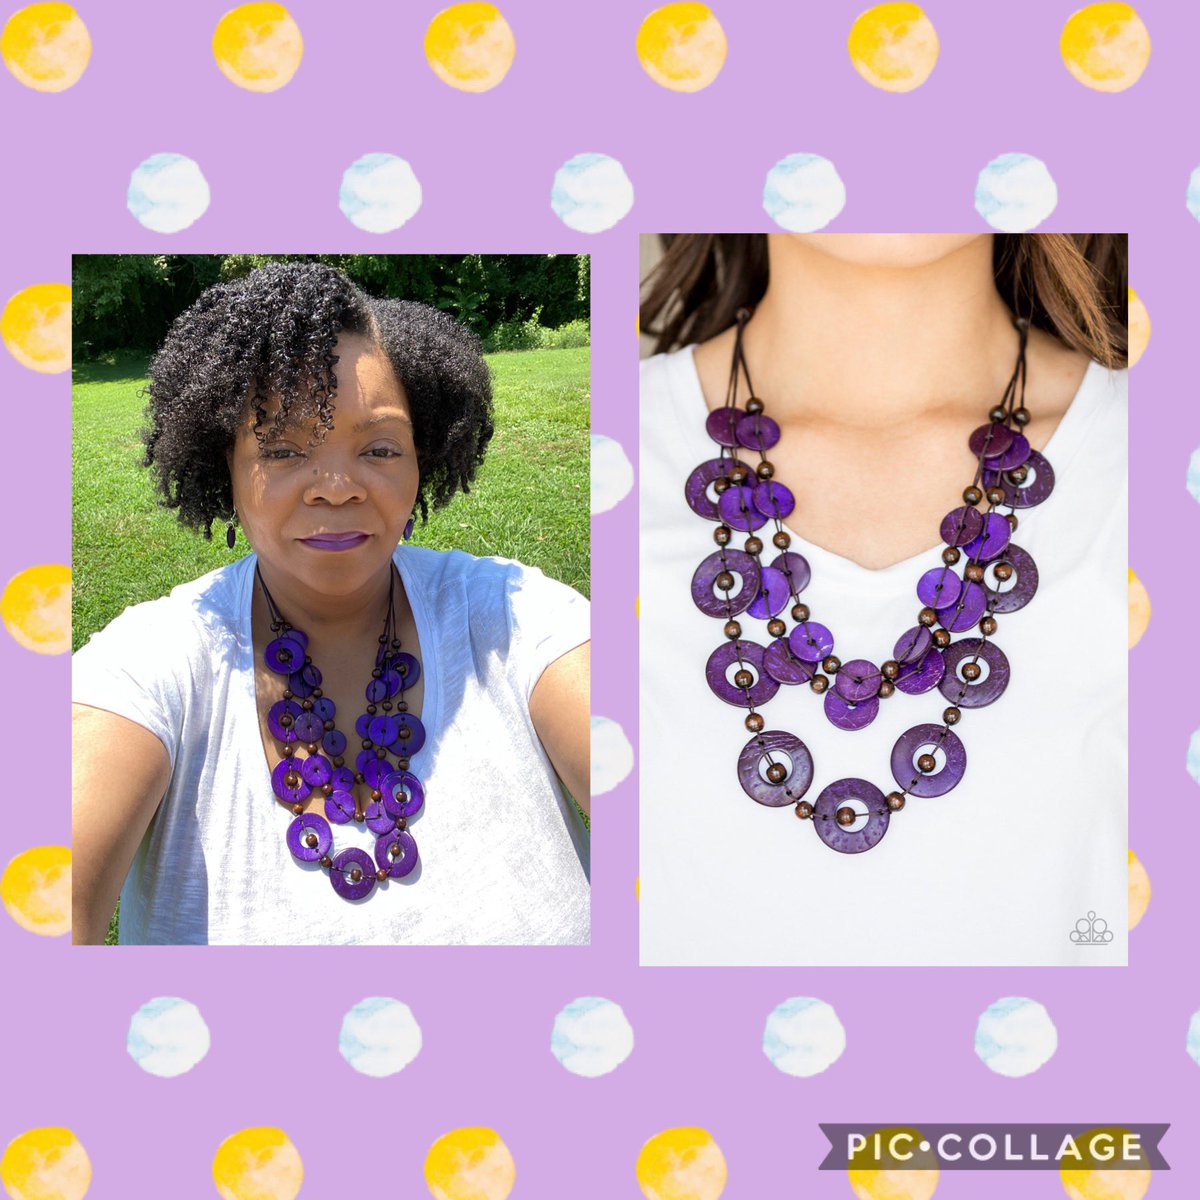 Catalina Coastin’ Purple wooden necklace set is available now #divineblingrva #paparazziaccessories #woodenjewelry #leadfree #nickelfreejewelry #fivedollarjewelry